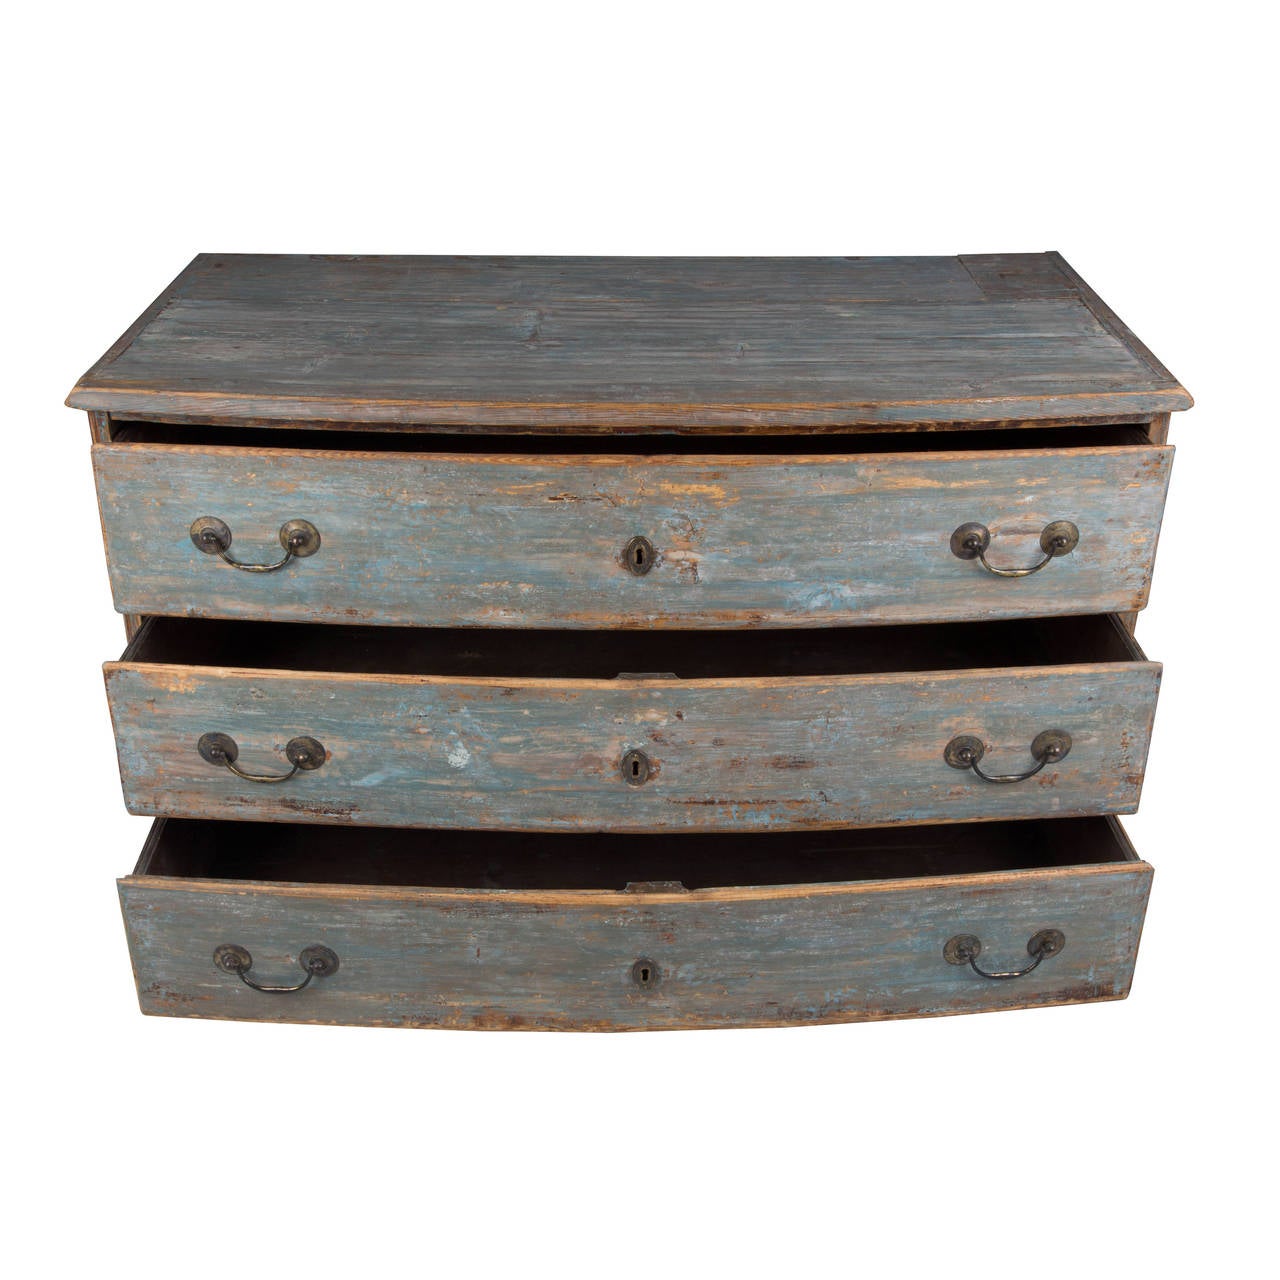 An 18th century French three-drawer commode in original blue paint.